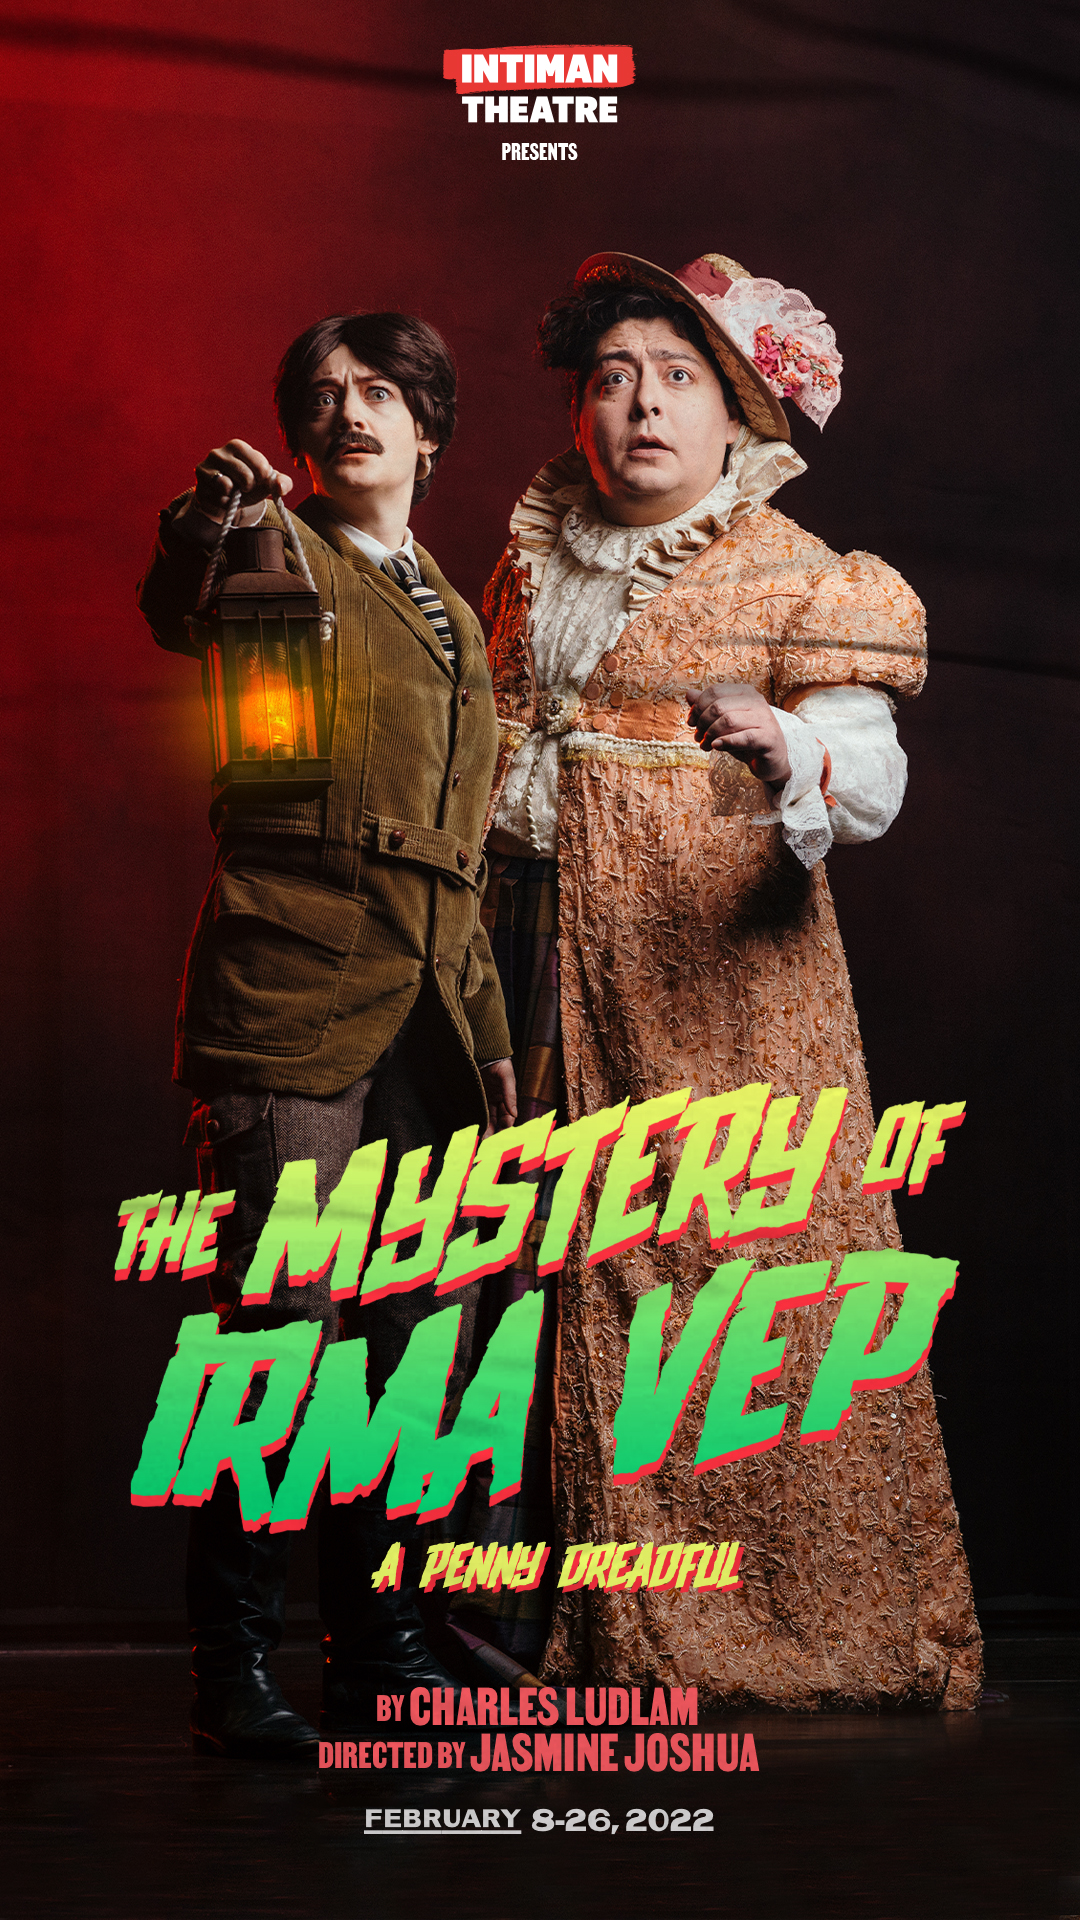 Irma Vep Cast & Character Guide: Who's Who in the HBO Series